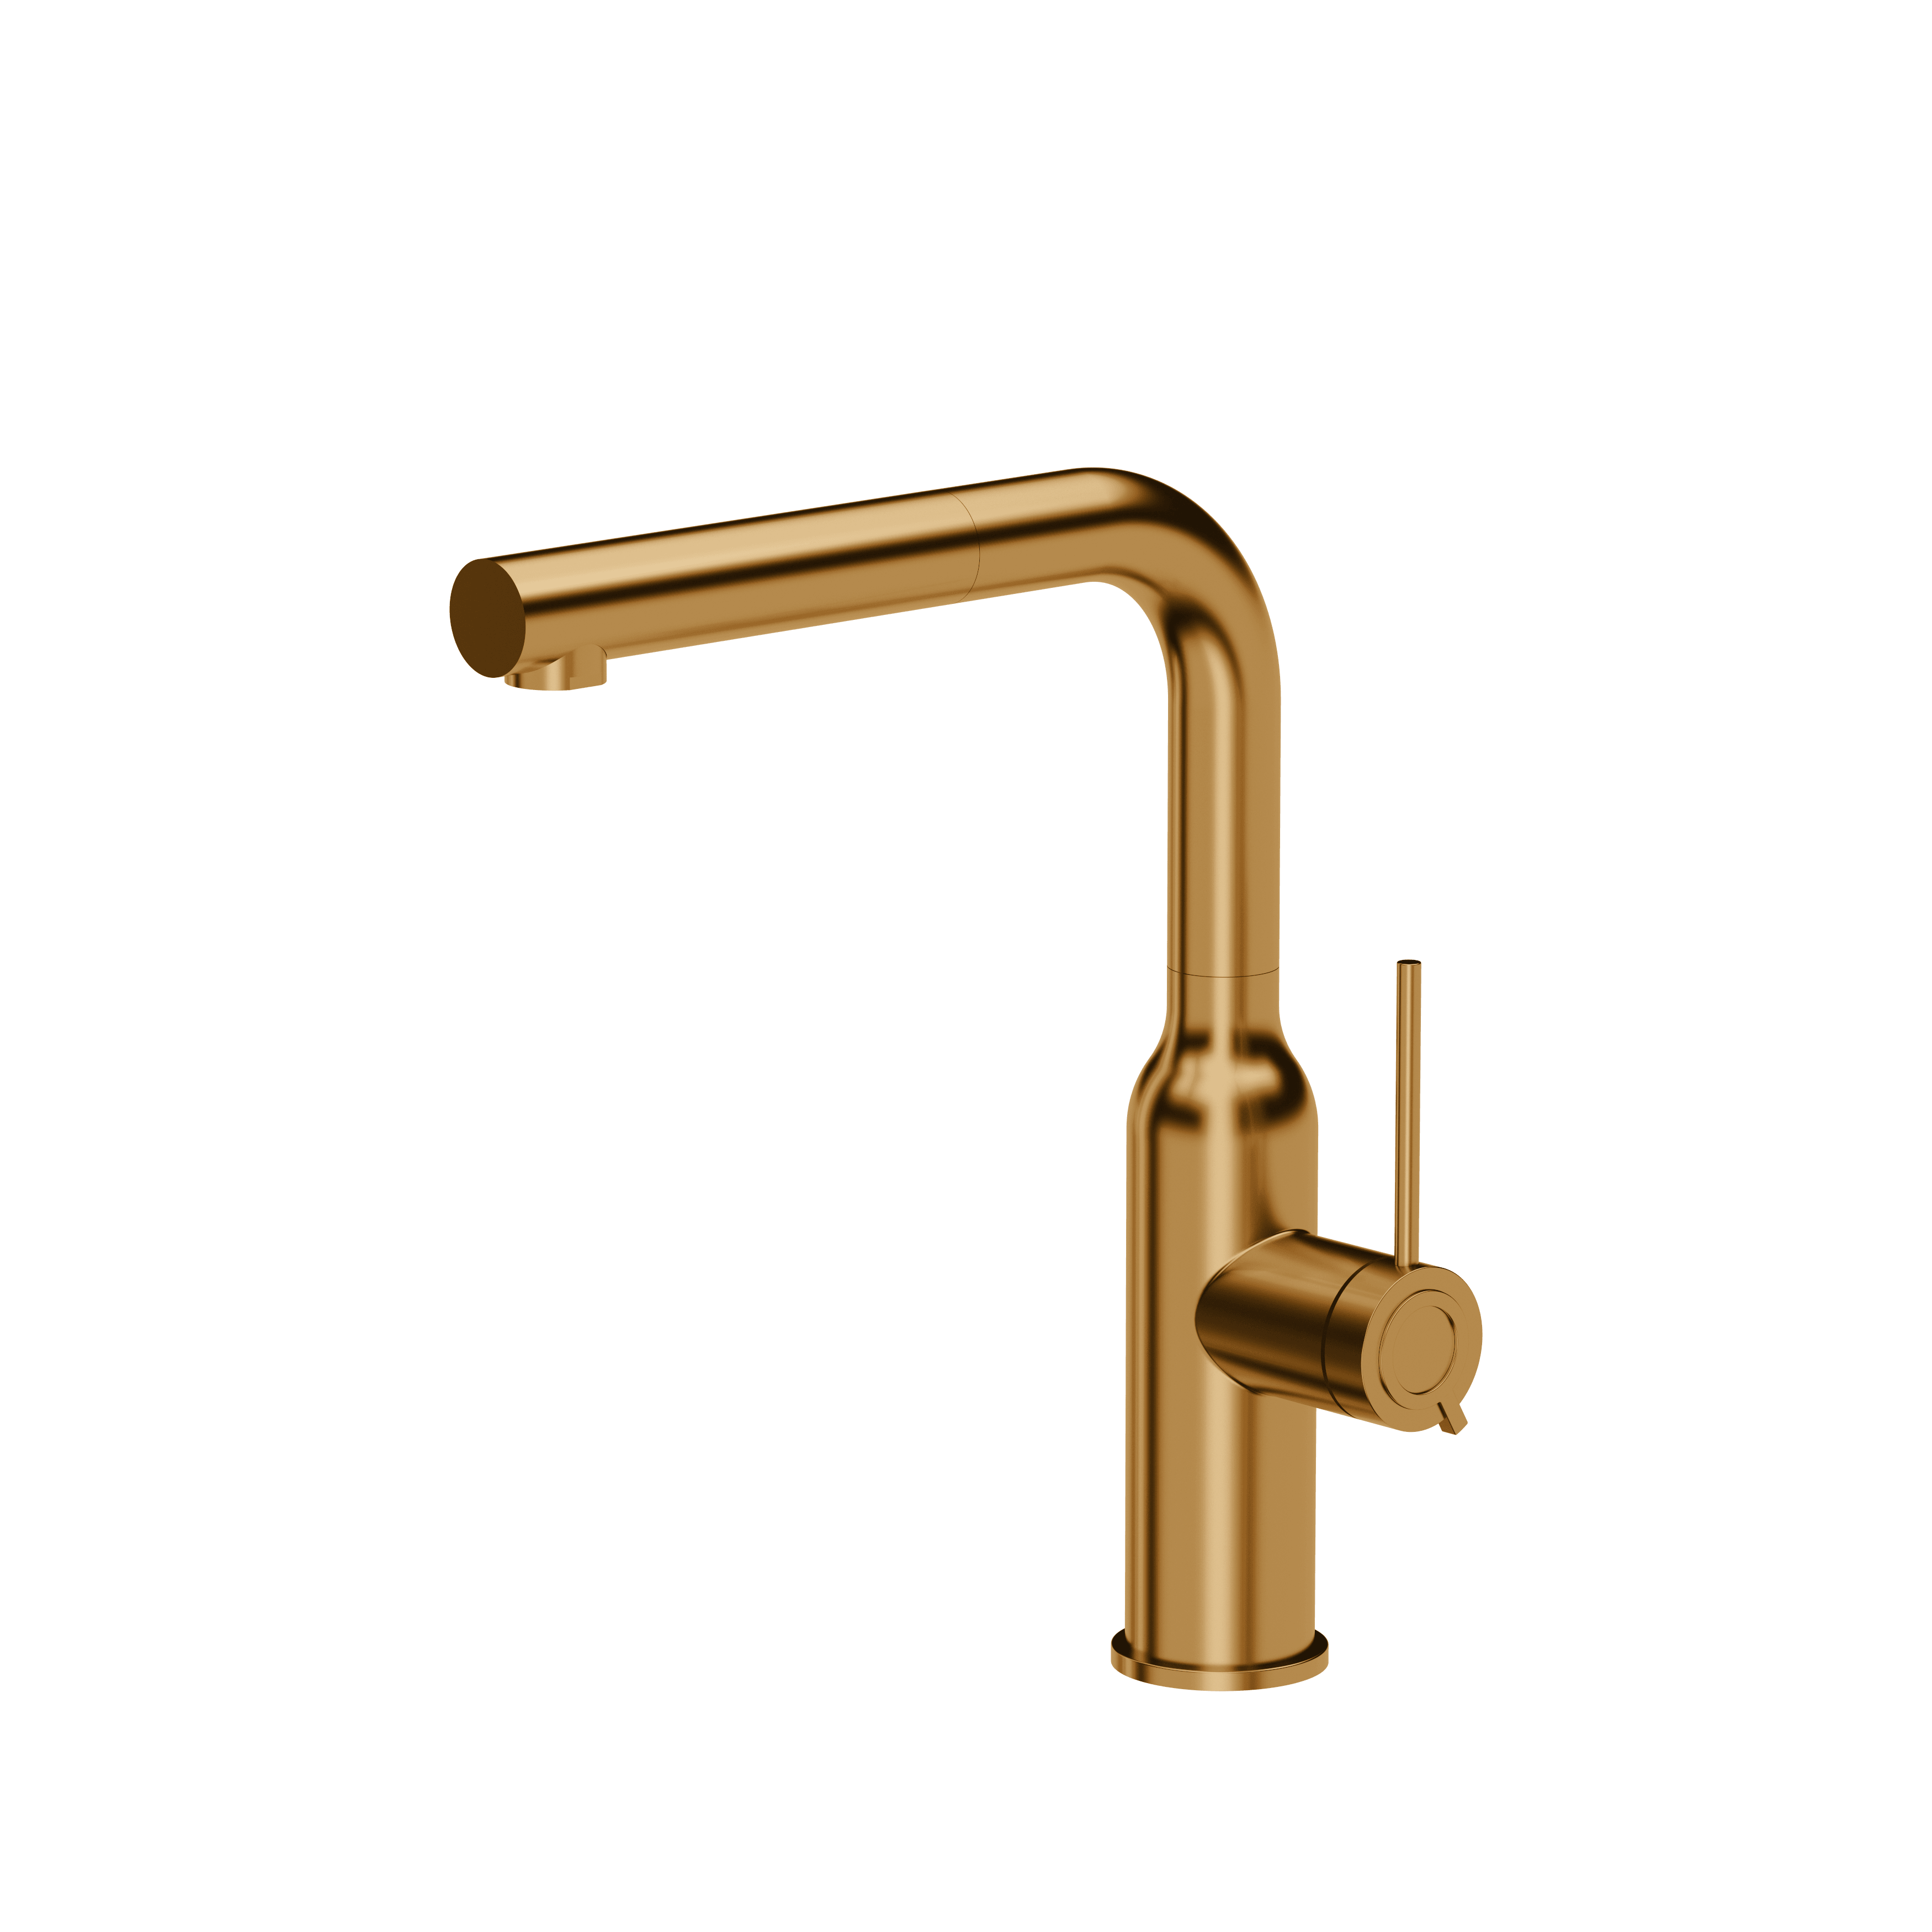 Quadron Angelina Copper Pull-out Mixer Tap - Olif